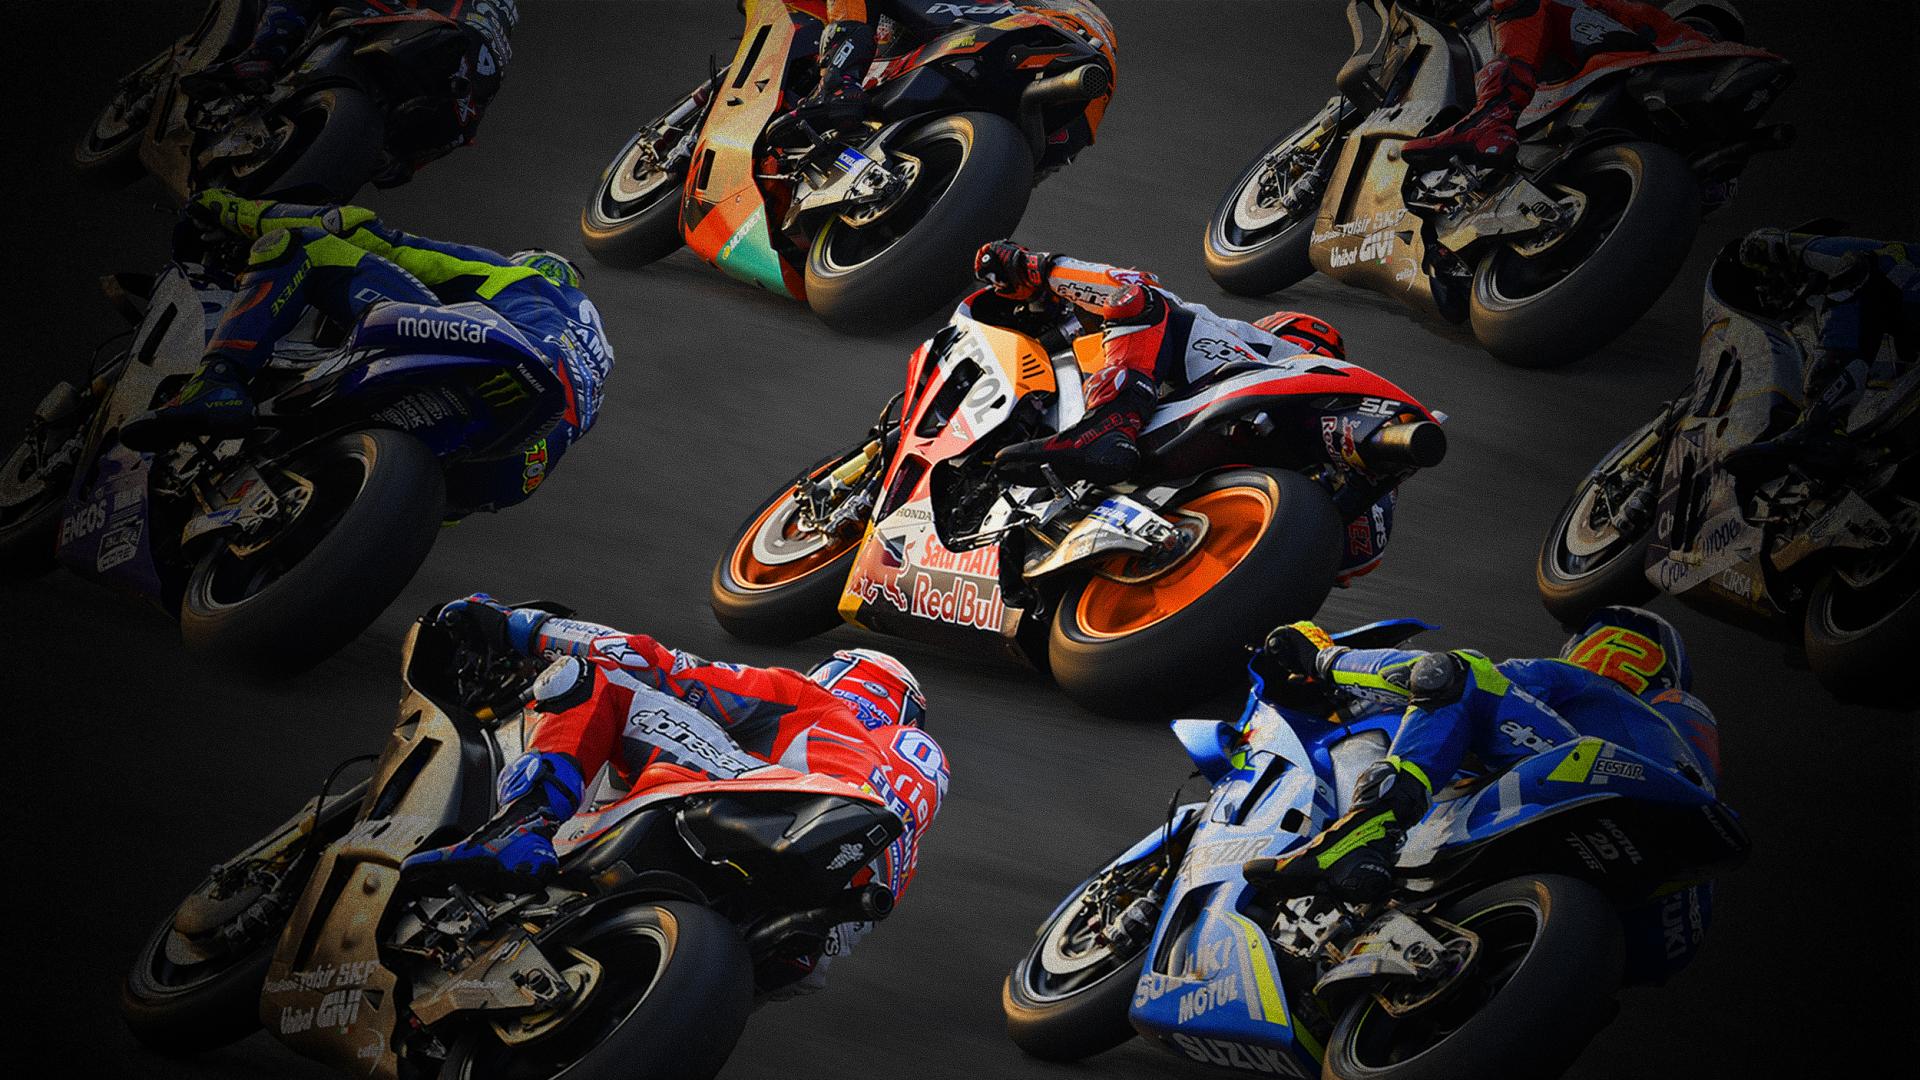 Once More Motogp Background Chopped